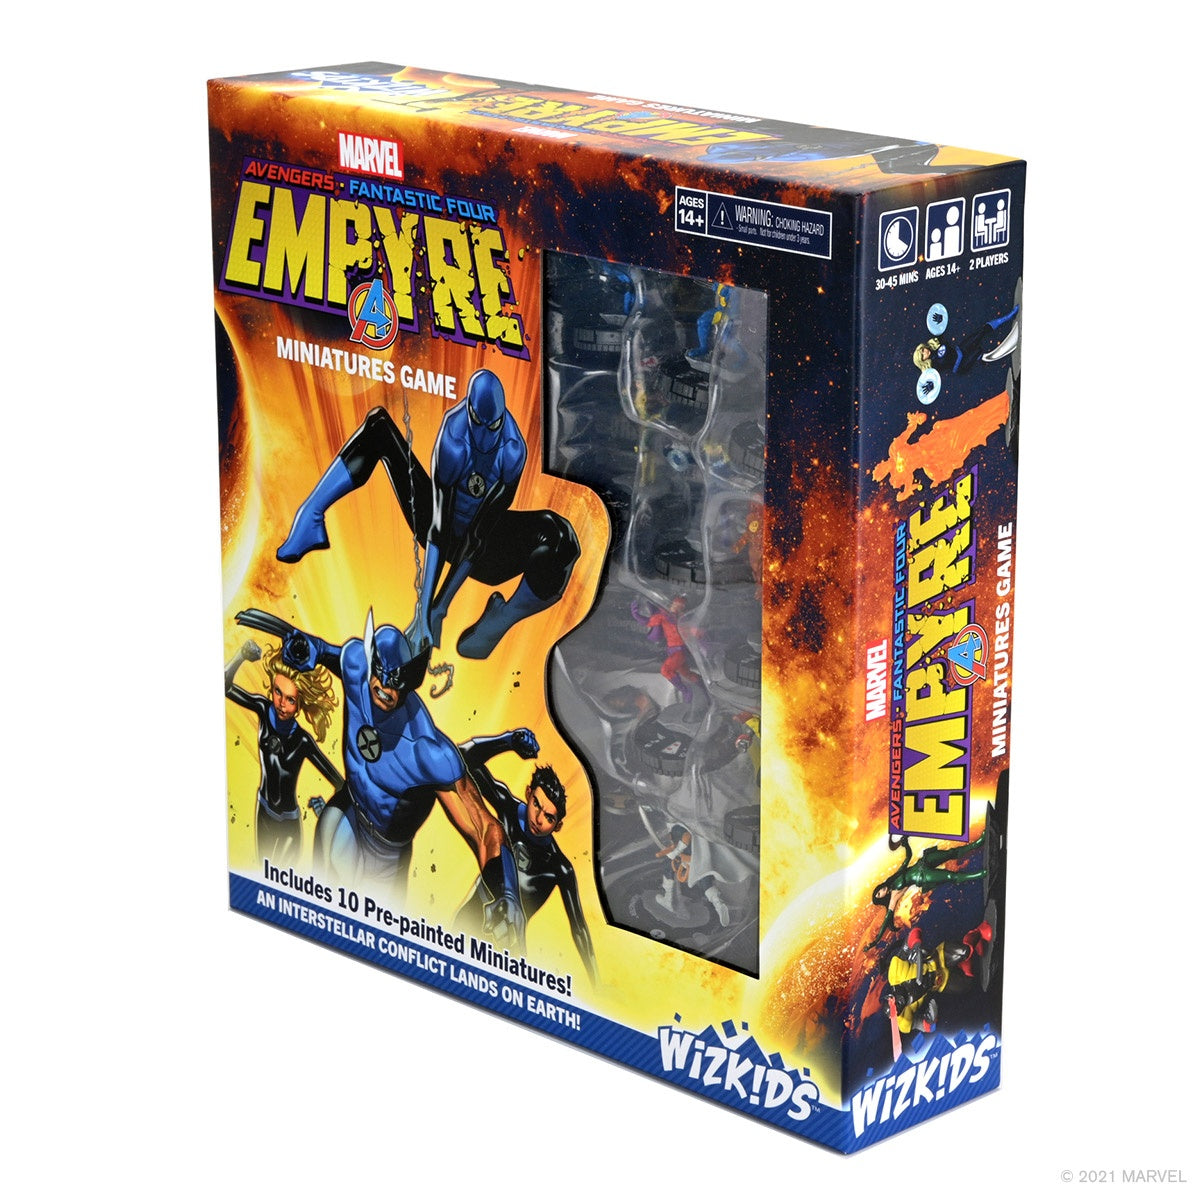 MARVEL EMPYRE MINIATURES GAME